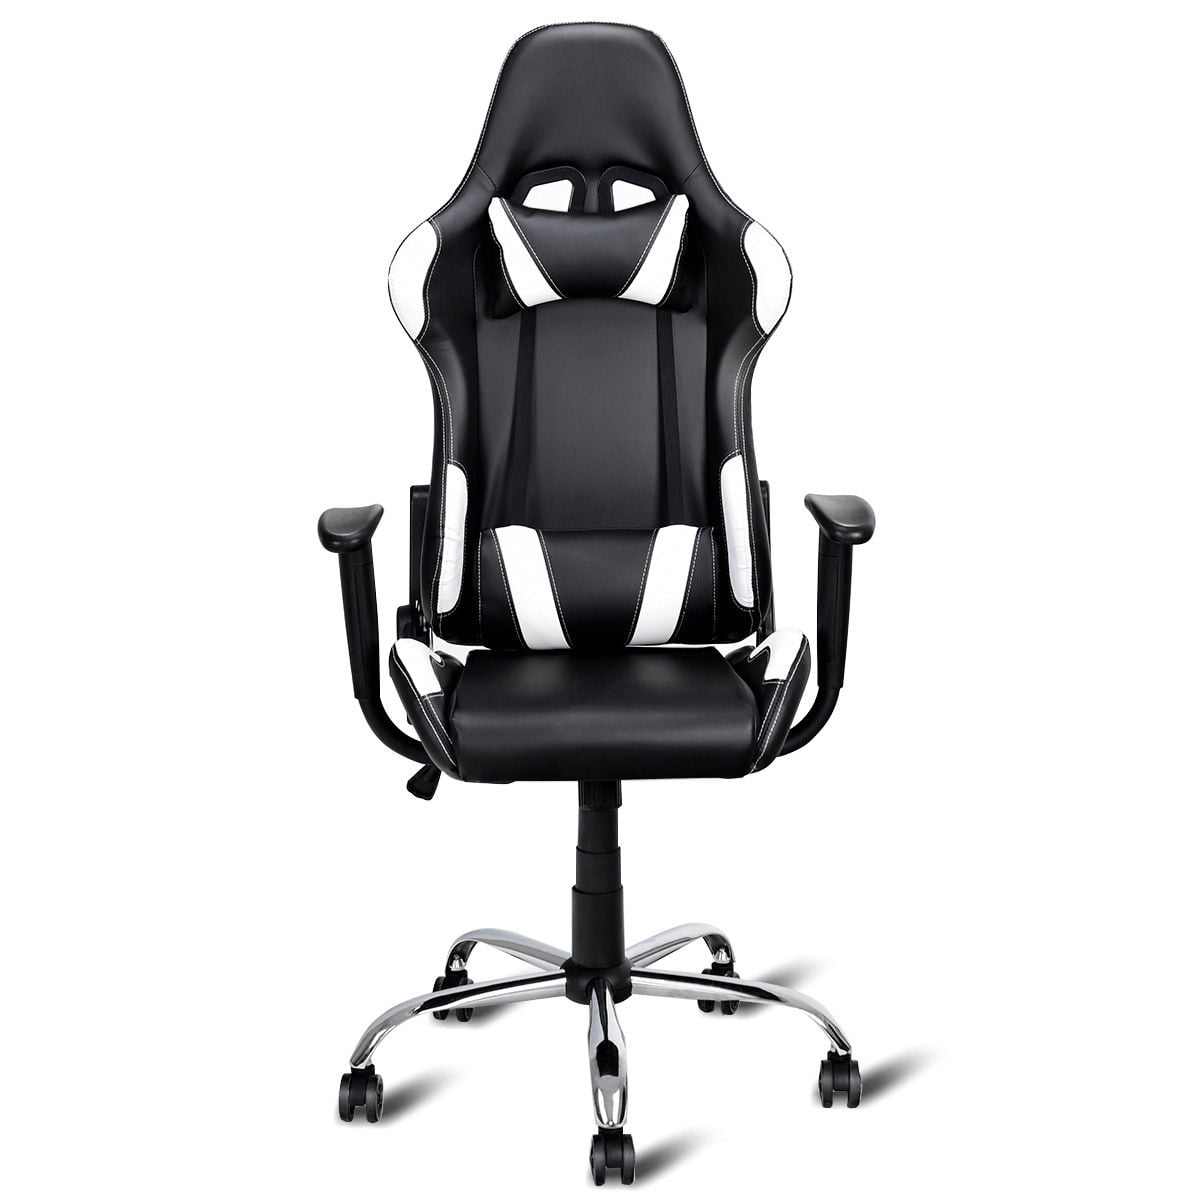 Costway Black and White Gaming Chair Office Chair Race